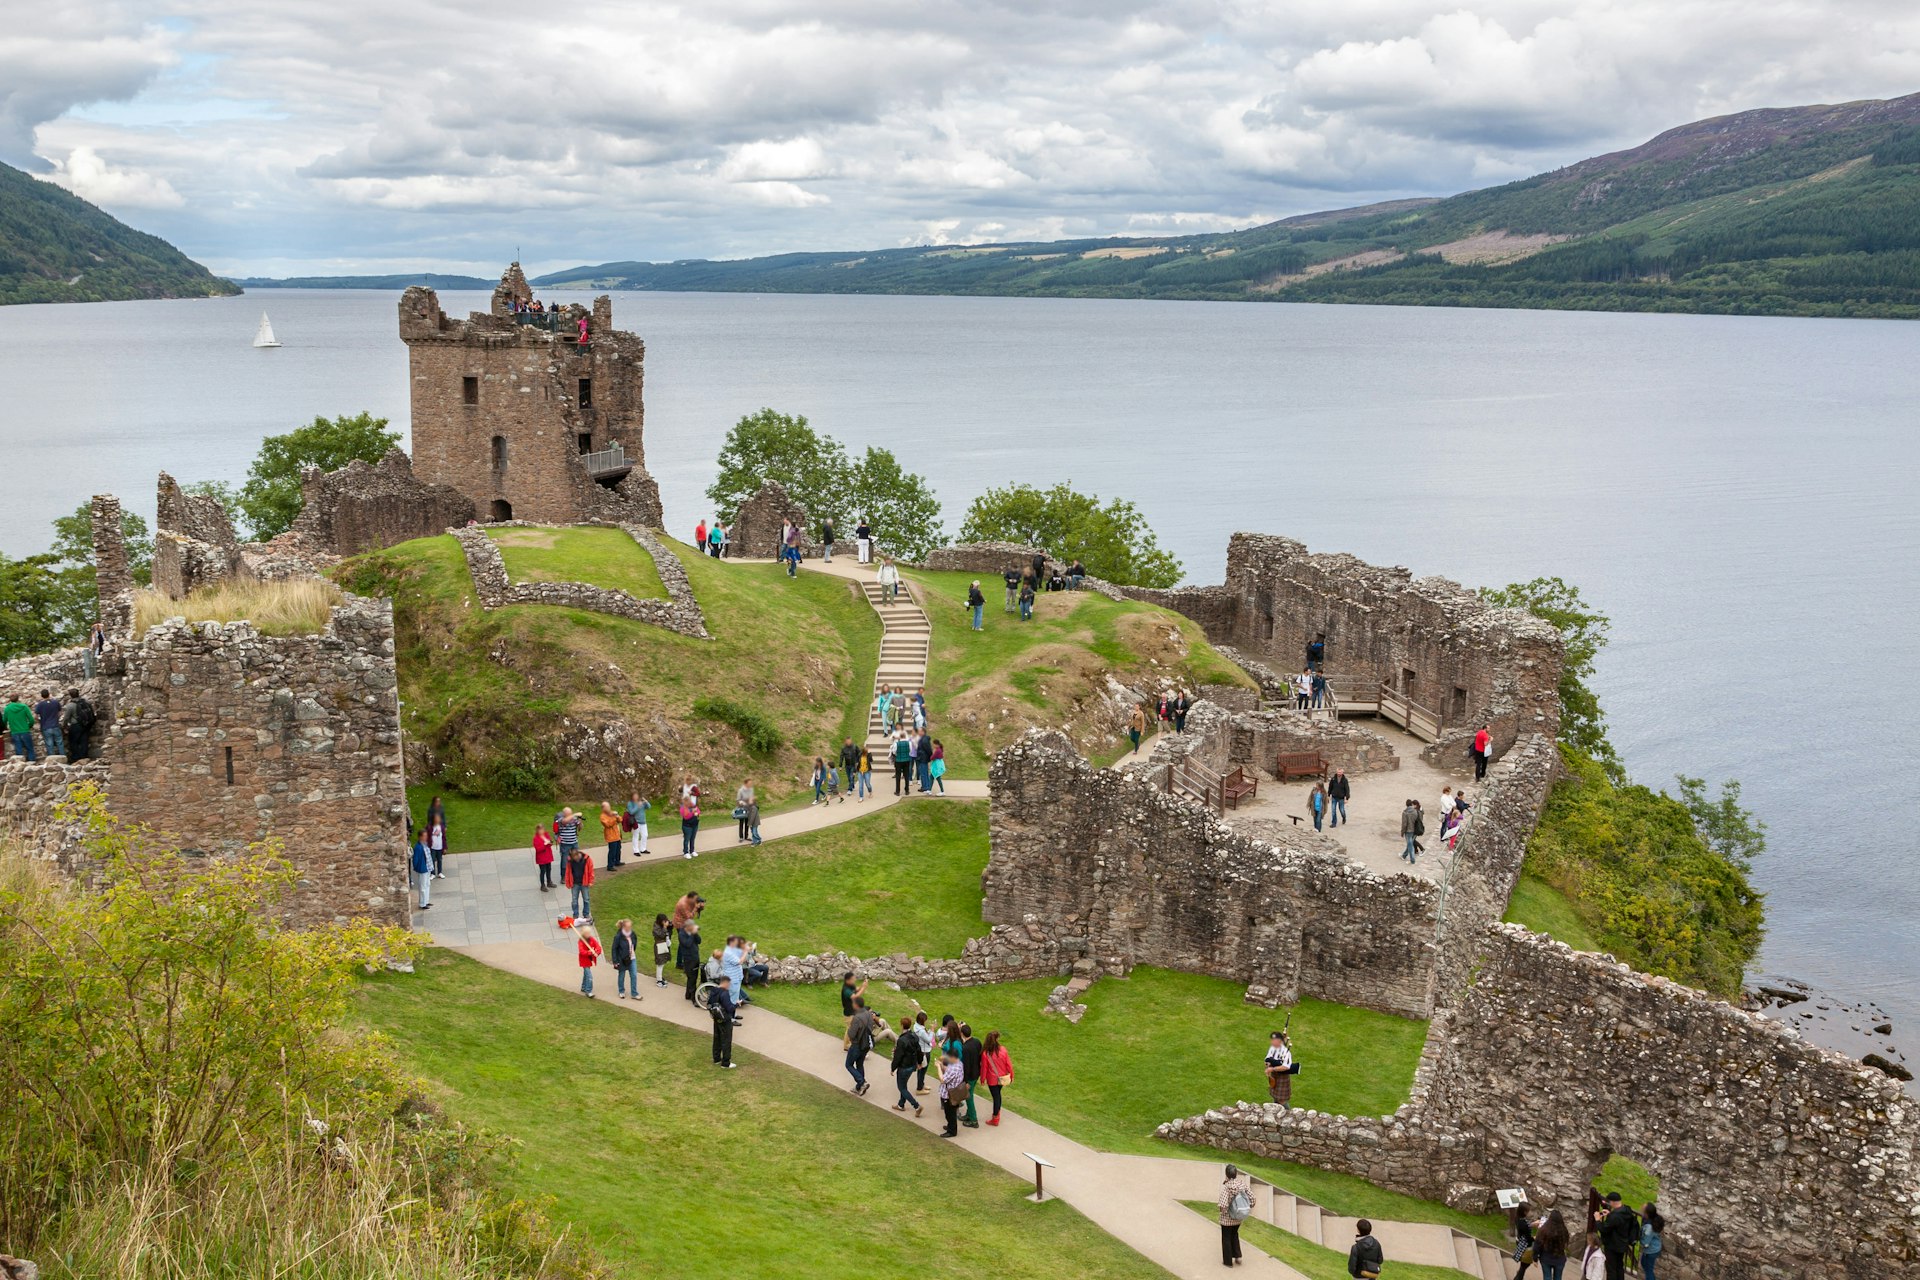 An aerial shot of a ruined castle with many visitors on the edge of a loch